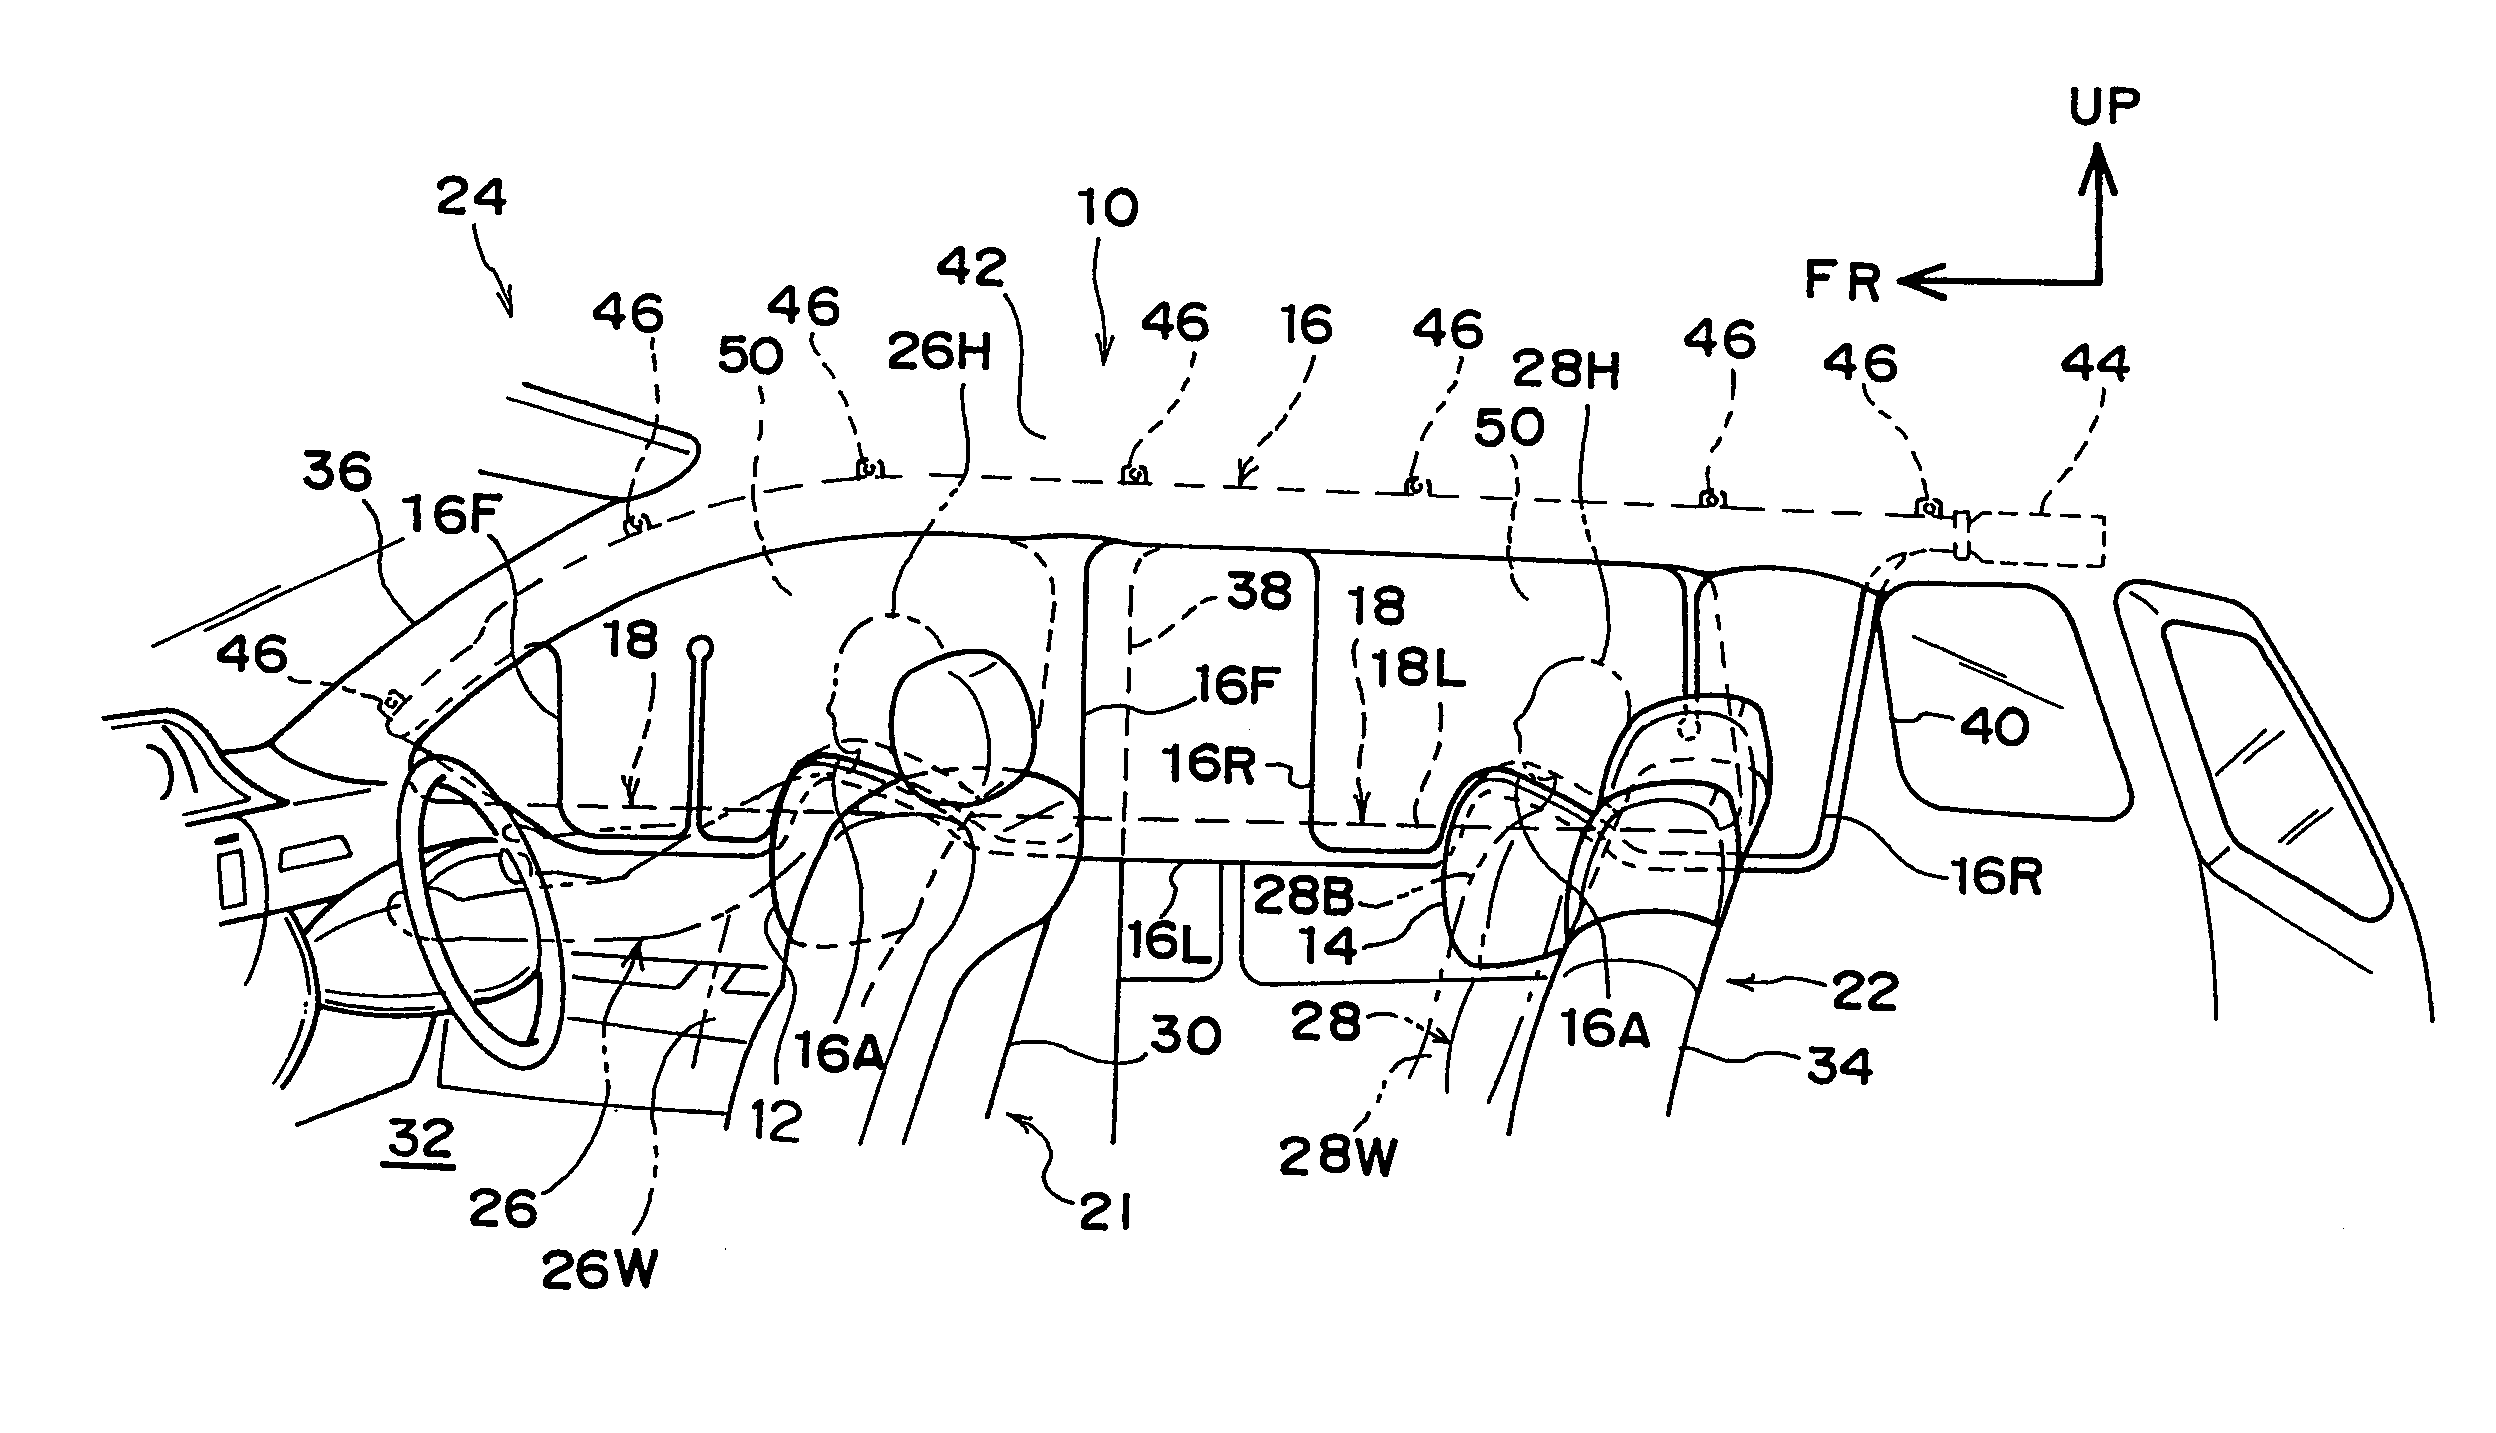 Air bag device for automobile